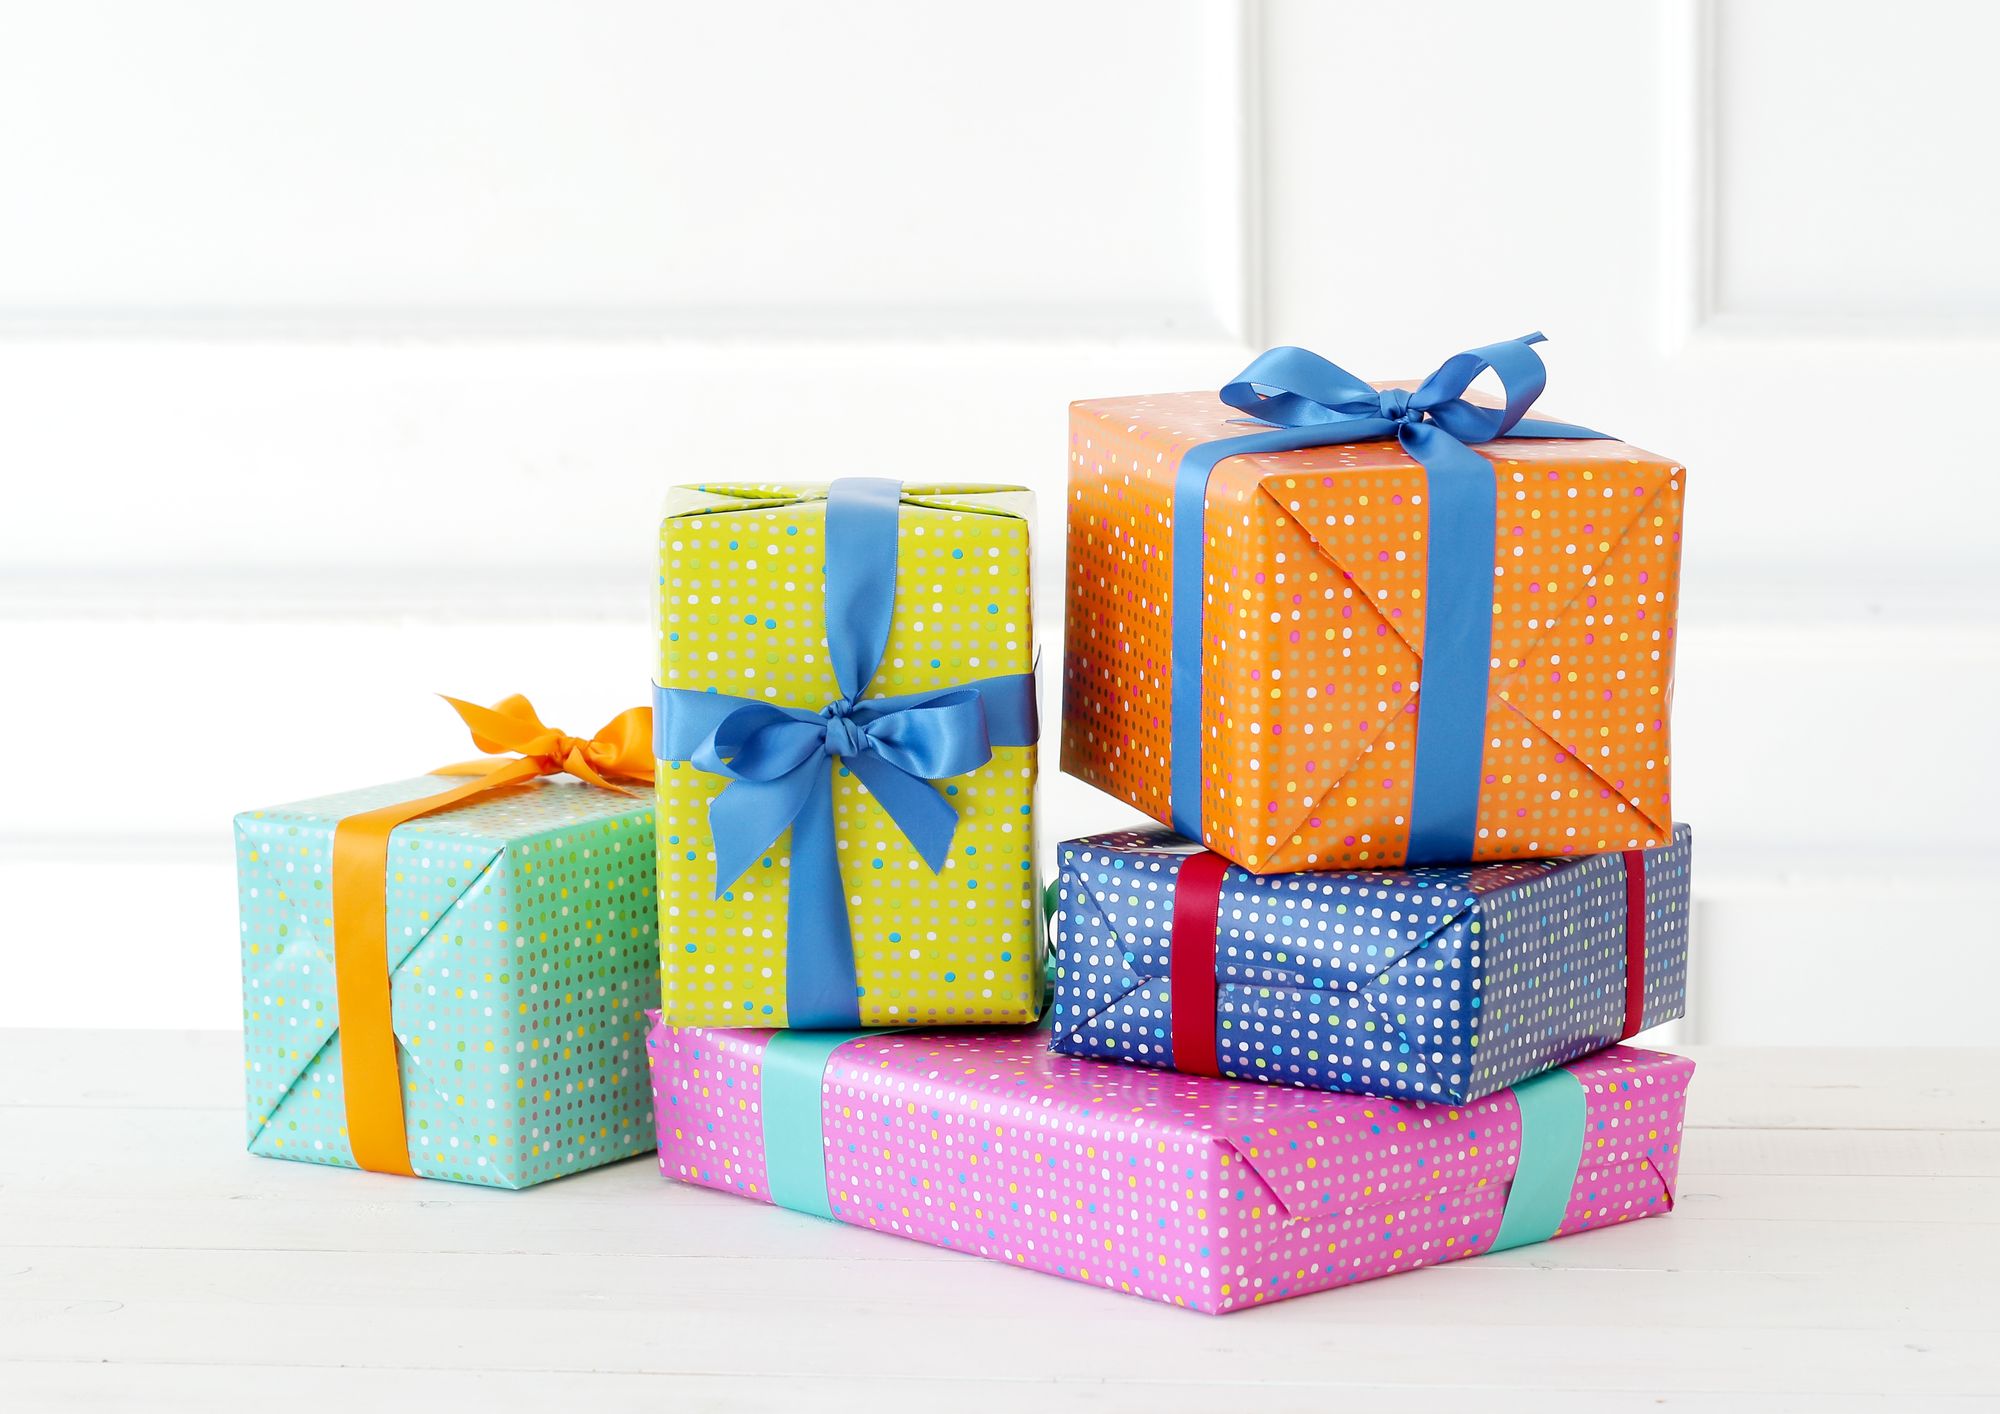 https://blog.empuls.io/content/images/2023/01/several-colorful-gifts-with-bow.jpg